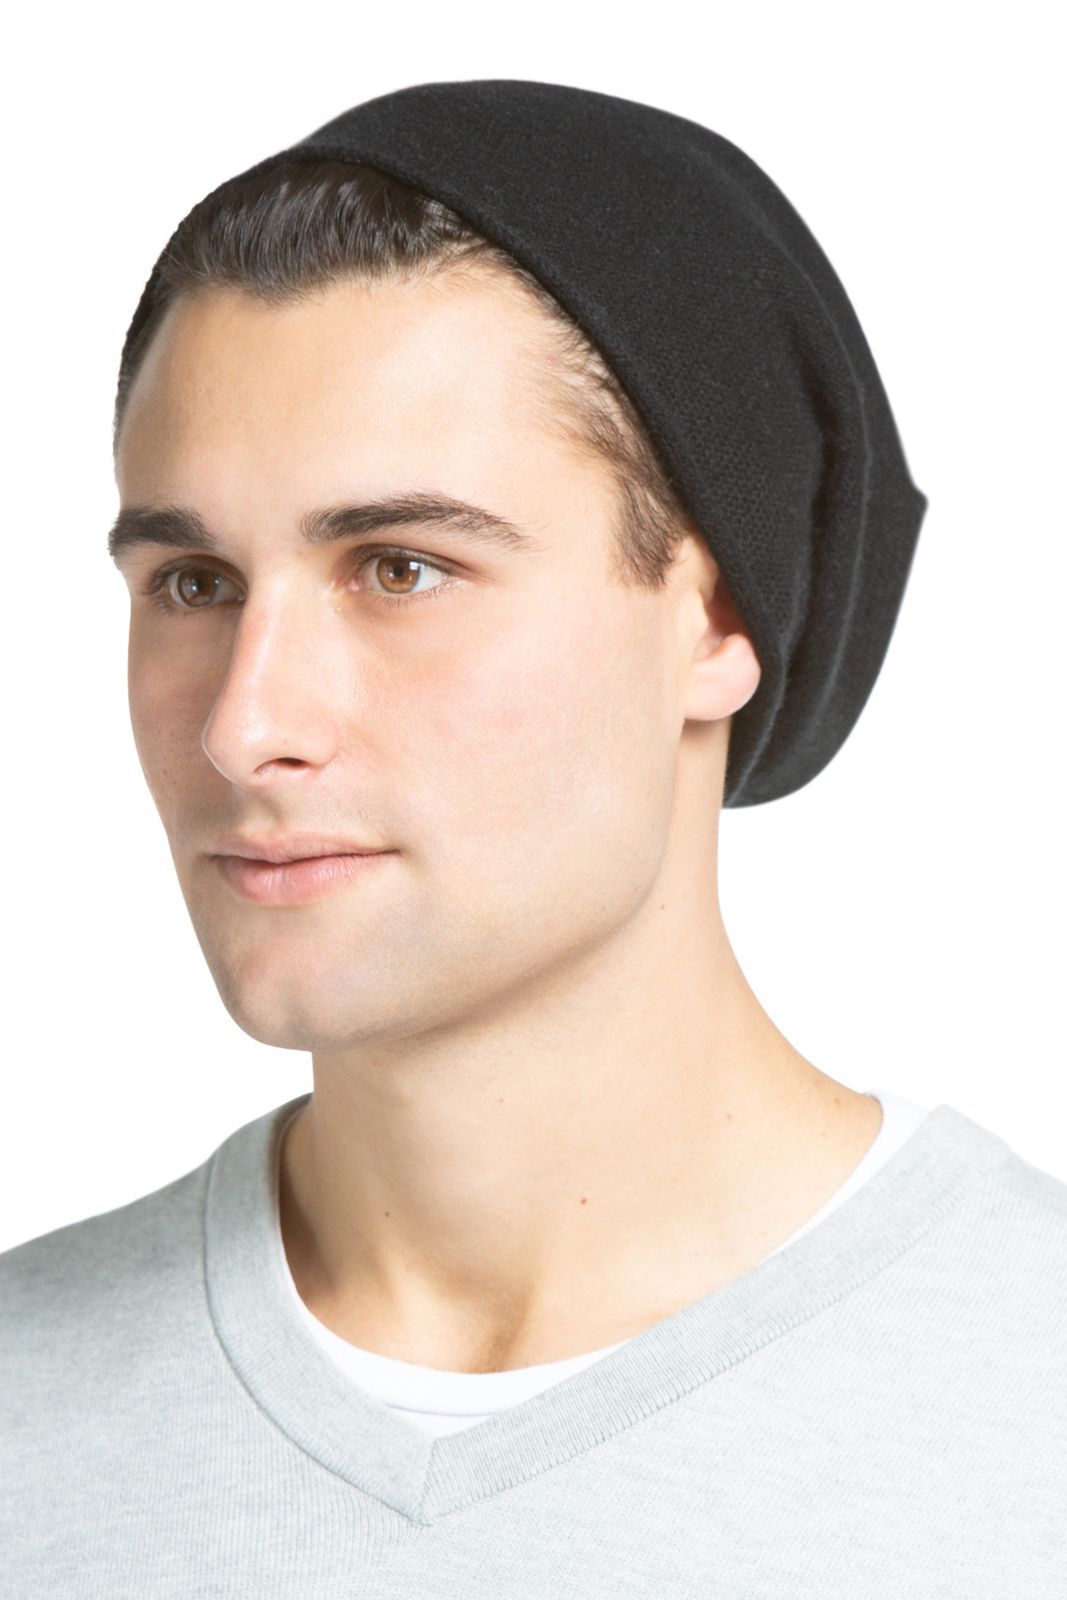 Men's 100% Pure Cashmere Slouchy Beanie Mens>Accessories>Hat Fishers Finery Black One Size Fits Most 